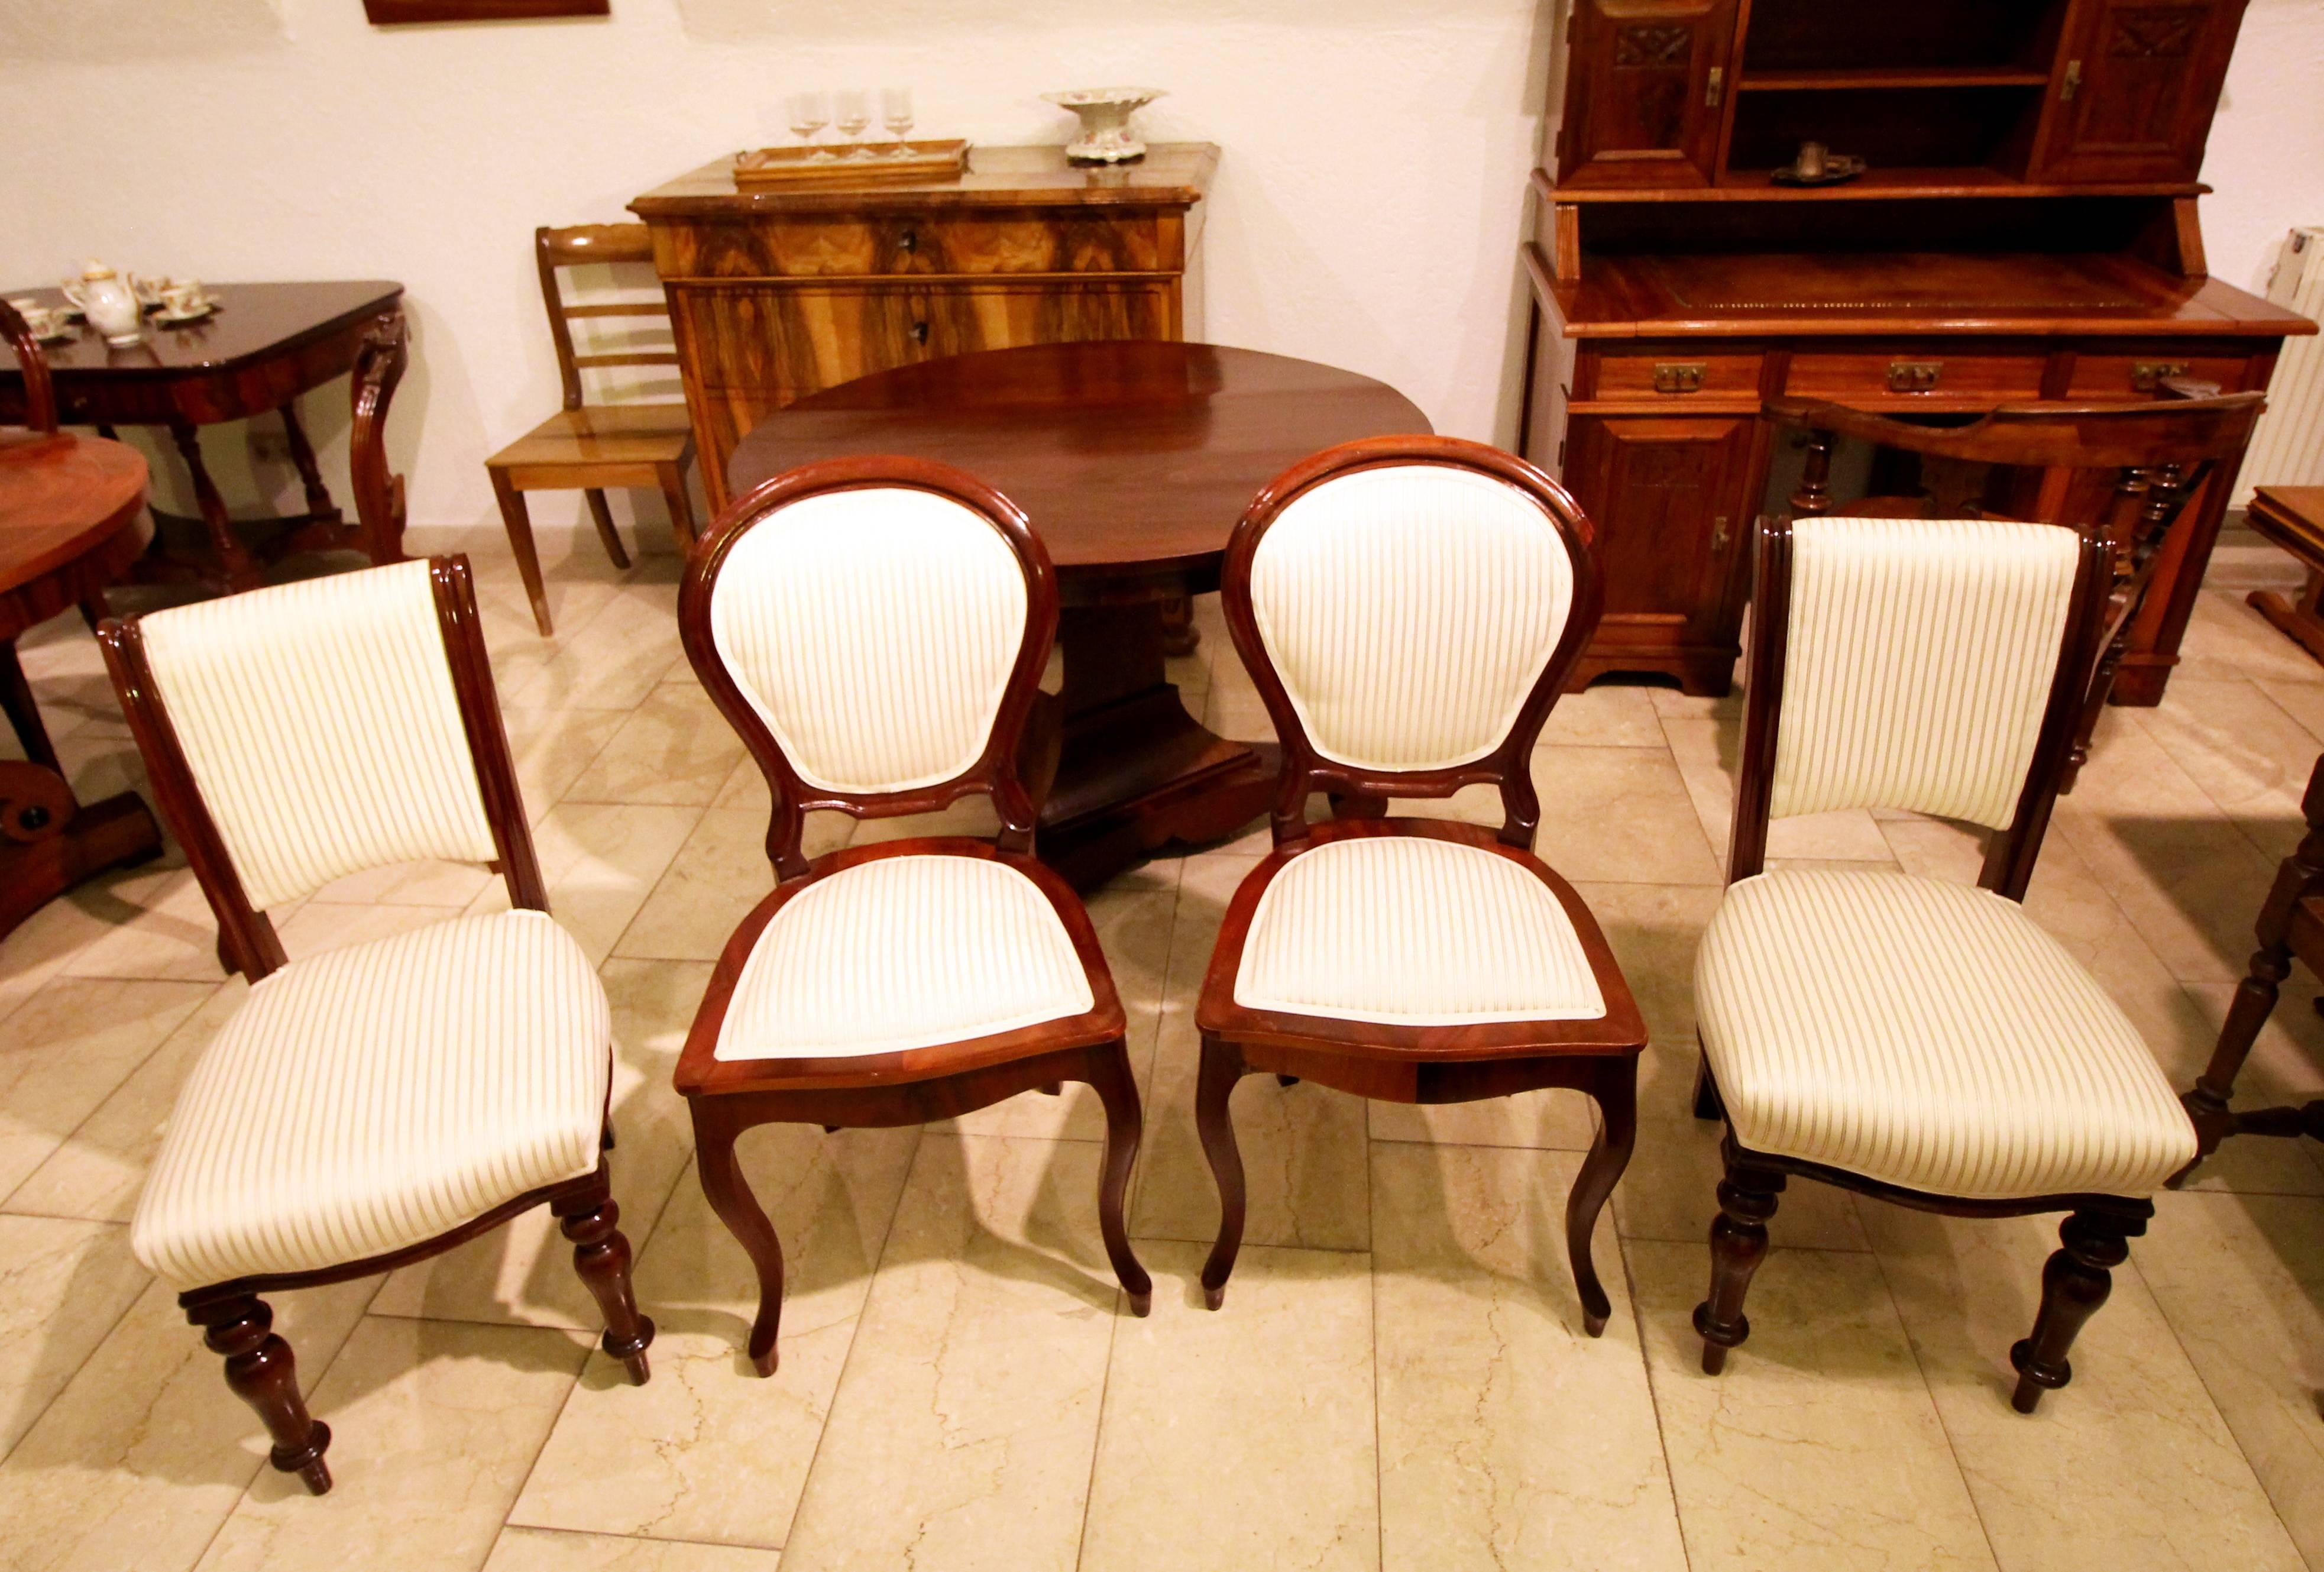 Beautiful set, four chairs and a round table, all in mahogany. The chairs are newly upholstered.

Chair dimensions:
Height: 92cm
Depth: 56cm
Width: 46cm
Seat height: 45cm.
 